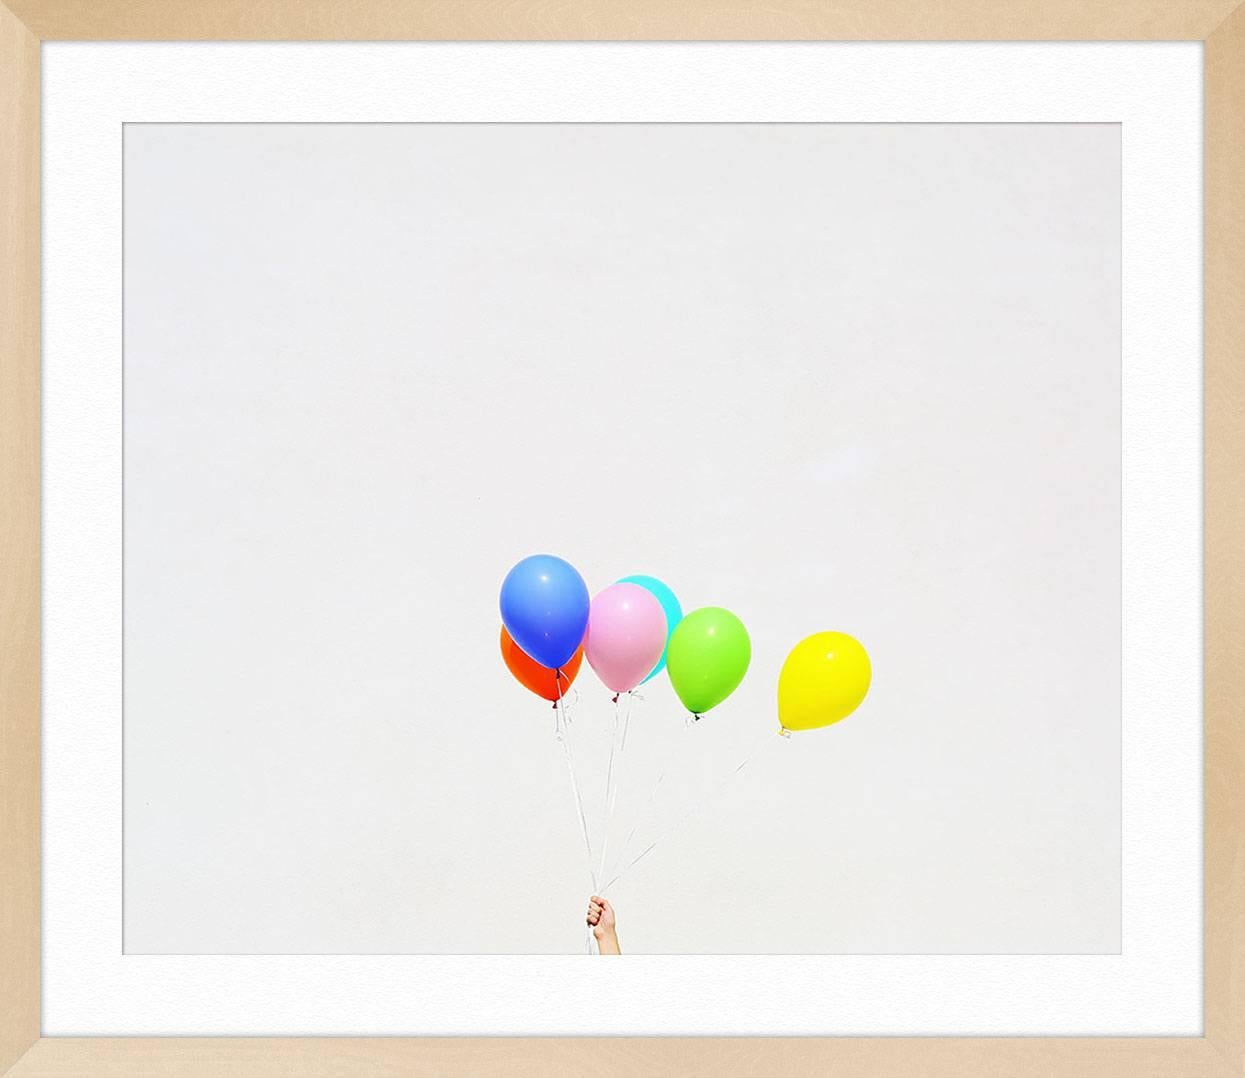 Untitled (Balloons) 1